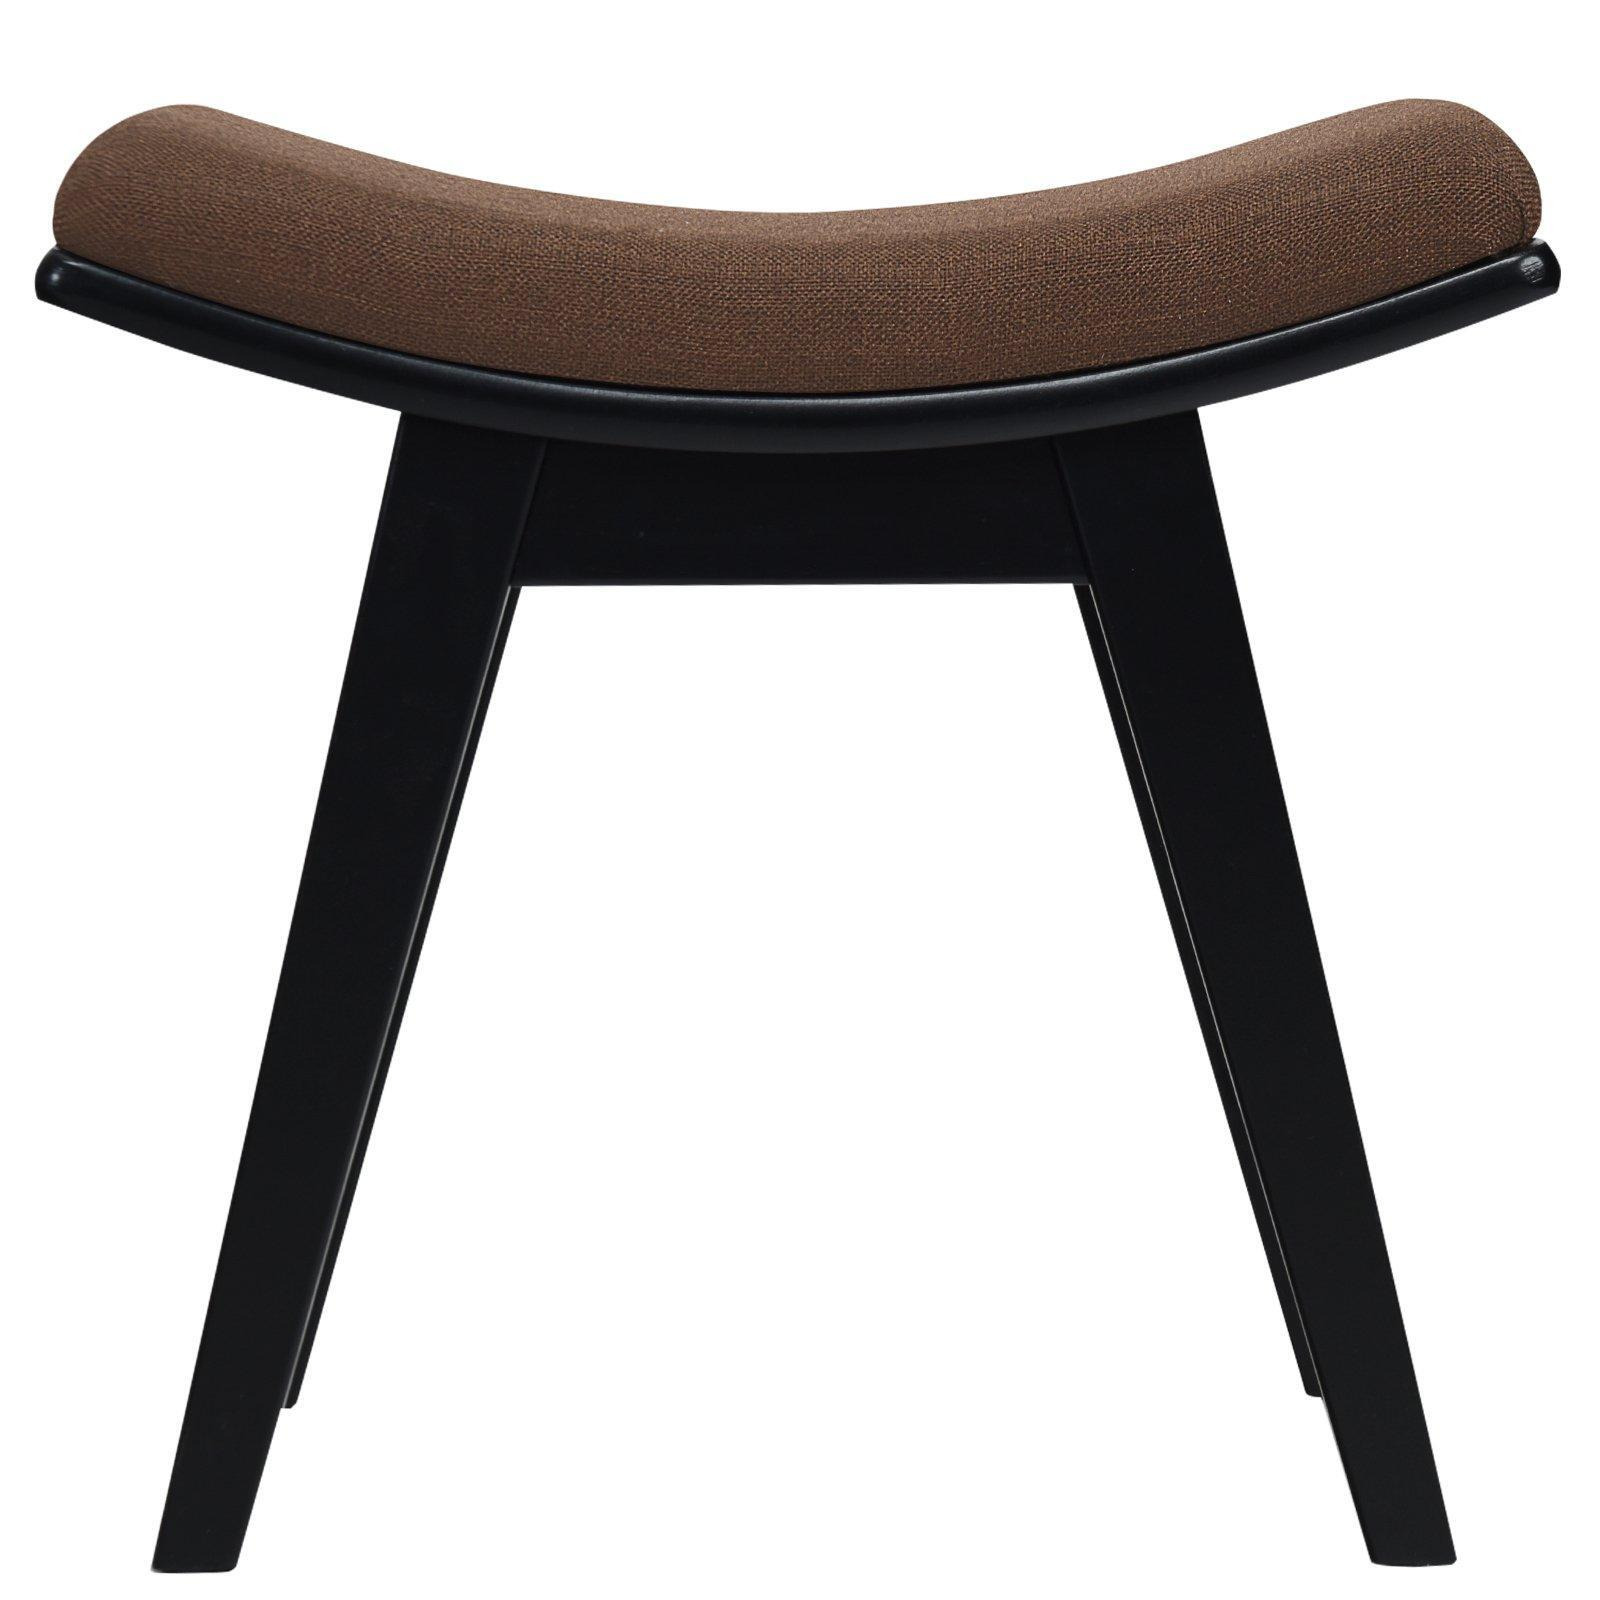 Make-Up Stool Dressing Chair with Curved Seat Cushion Wooden Desk Stool - image 1